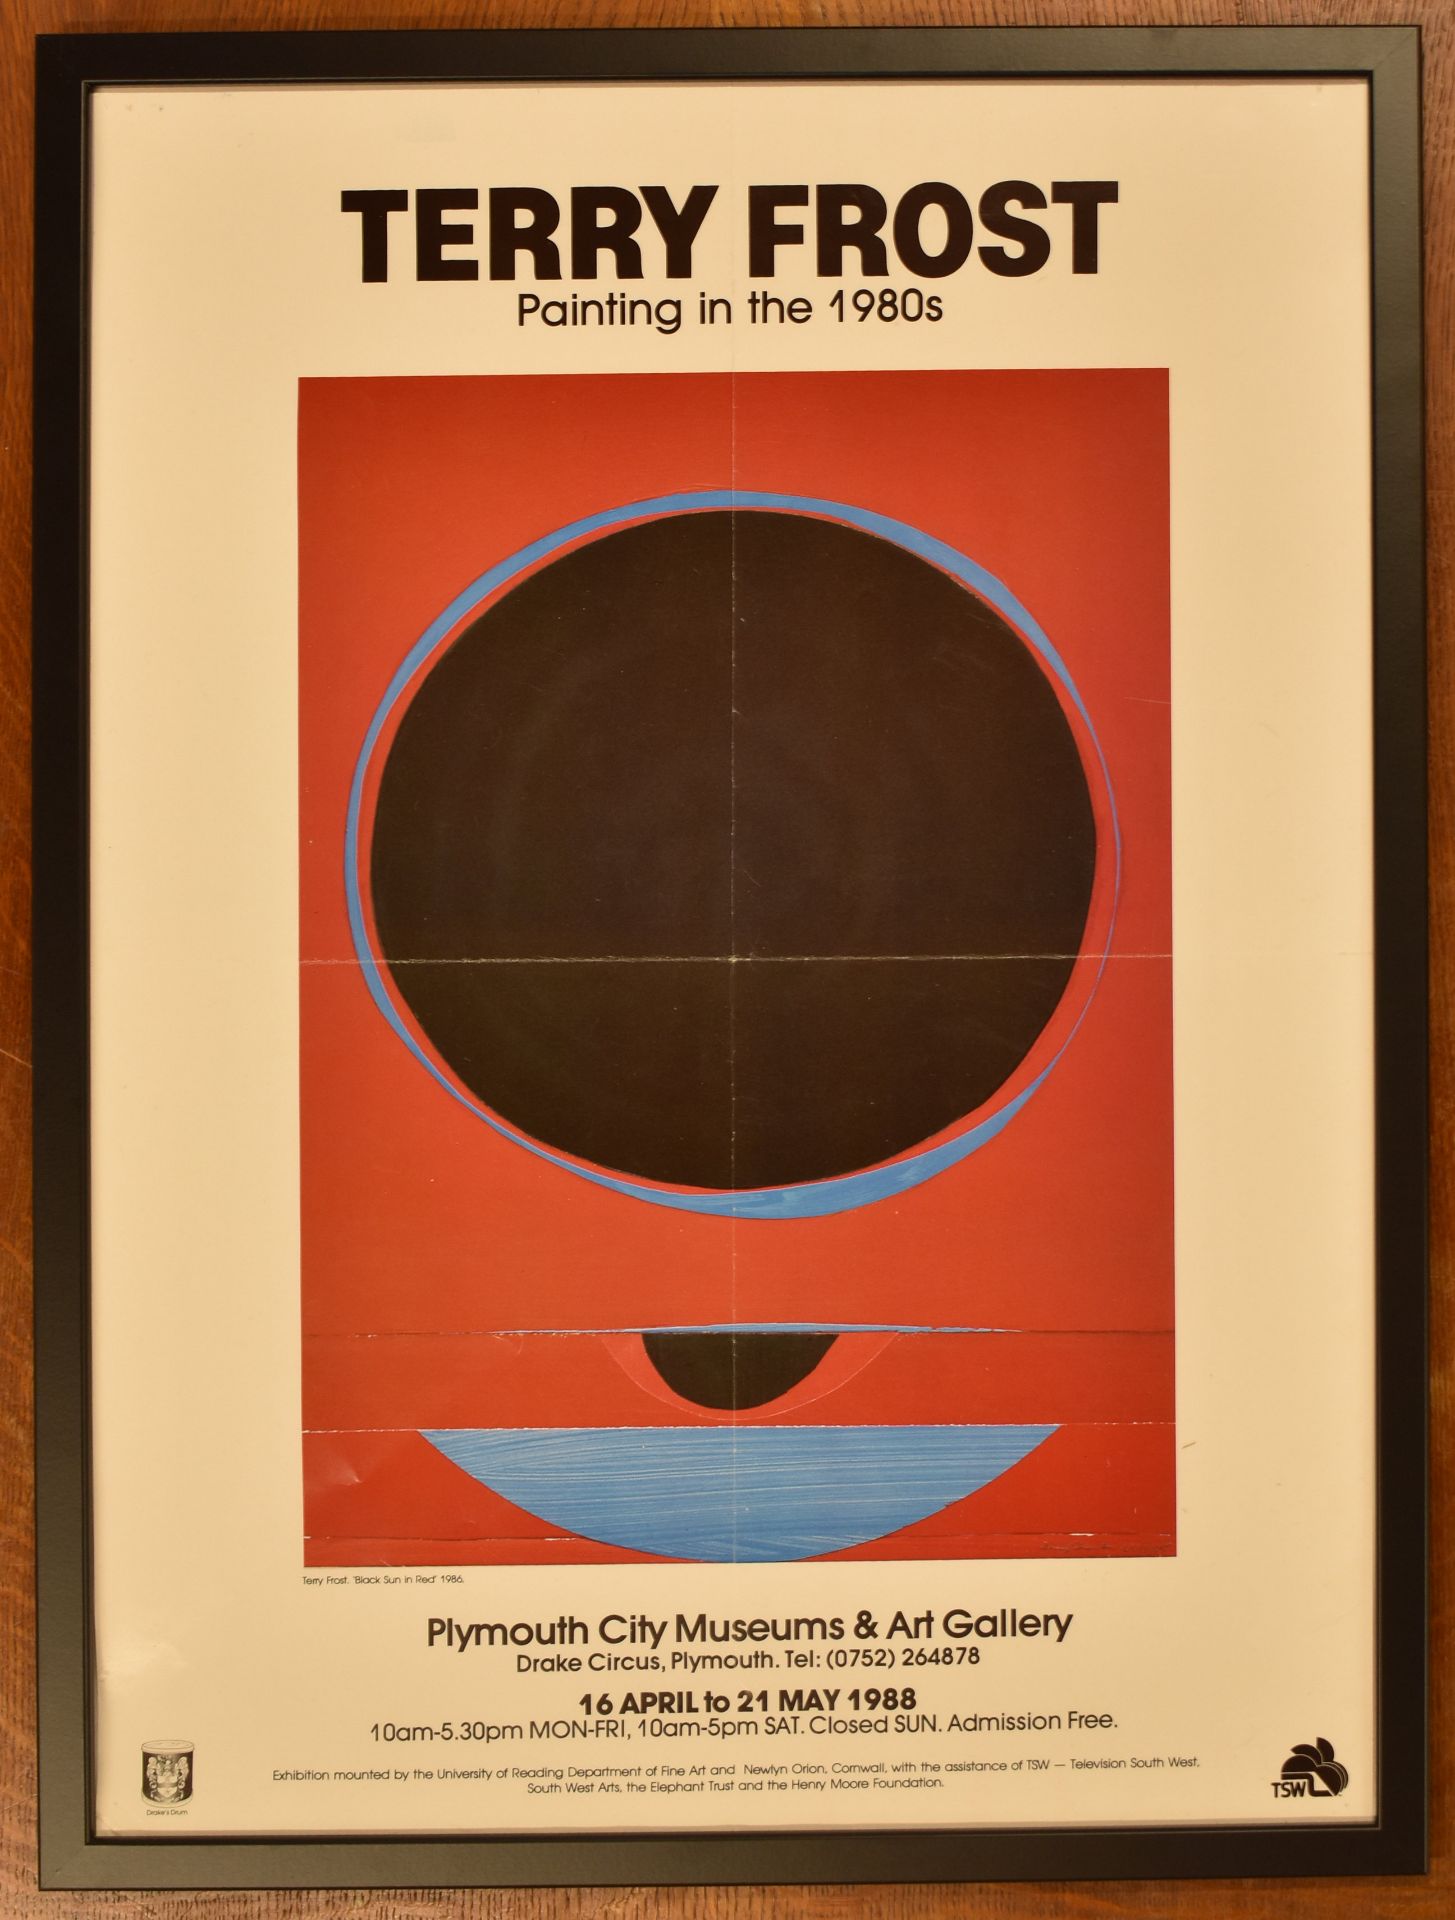 TERRY FROST RA - ' PAINTING IN THE 1980S ' EXHIBITION POSTER - Image 2 of 5